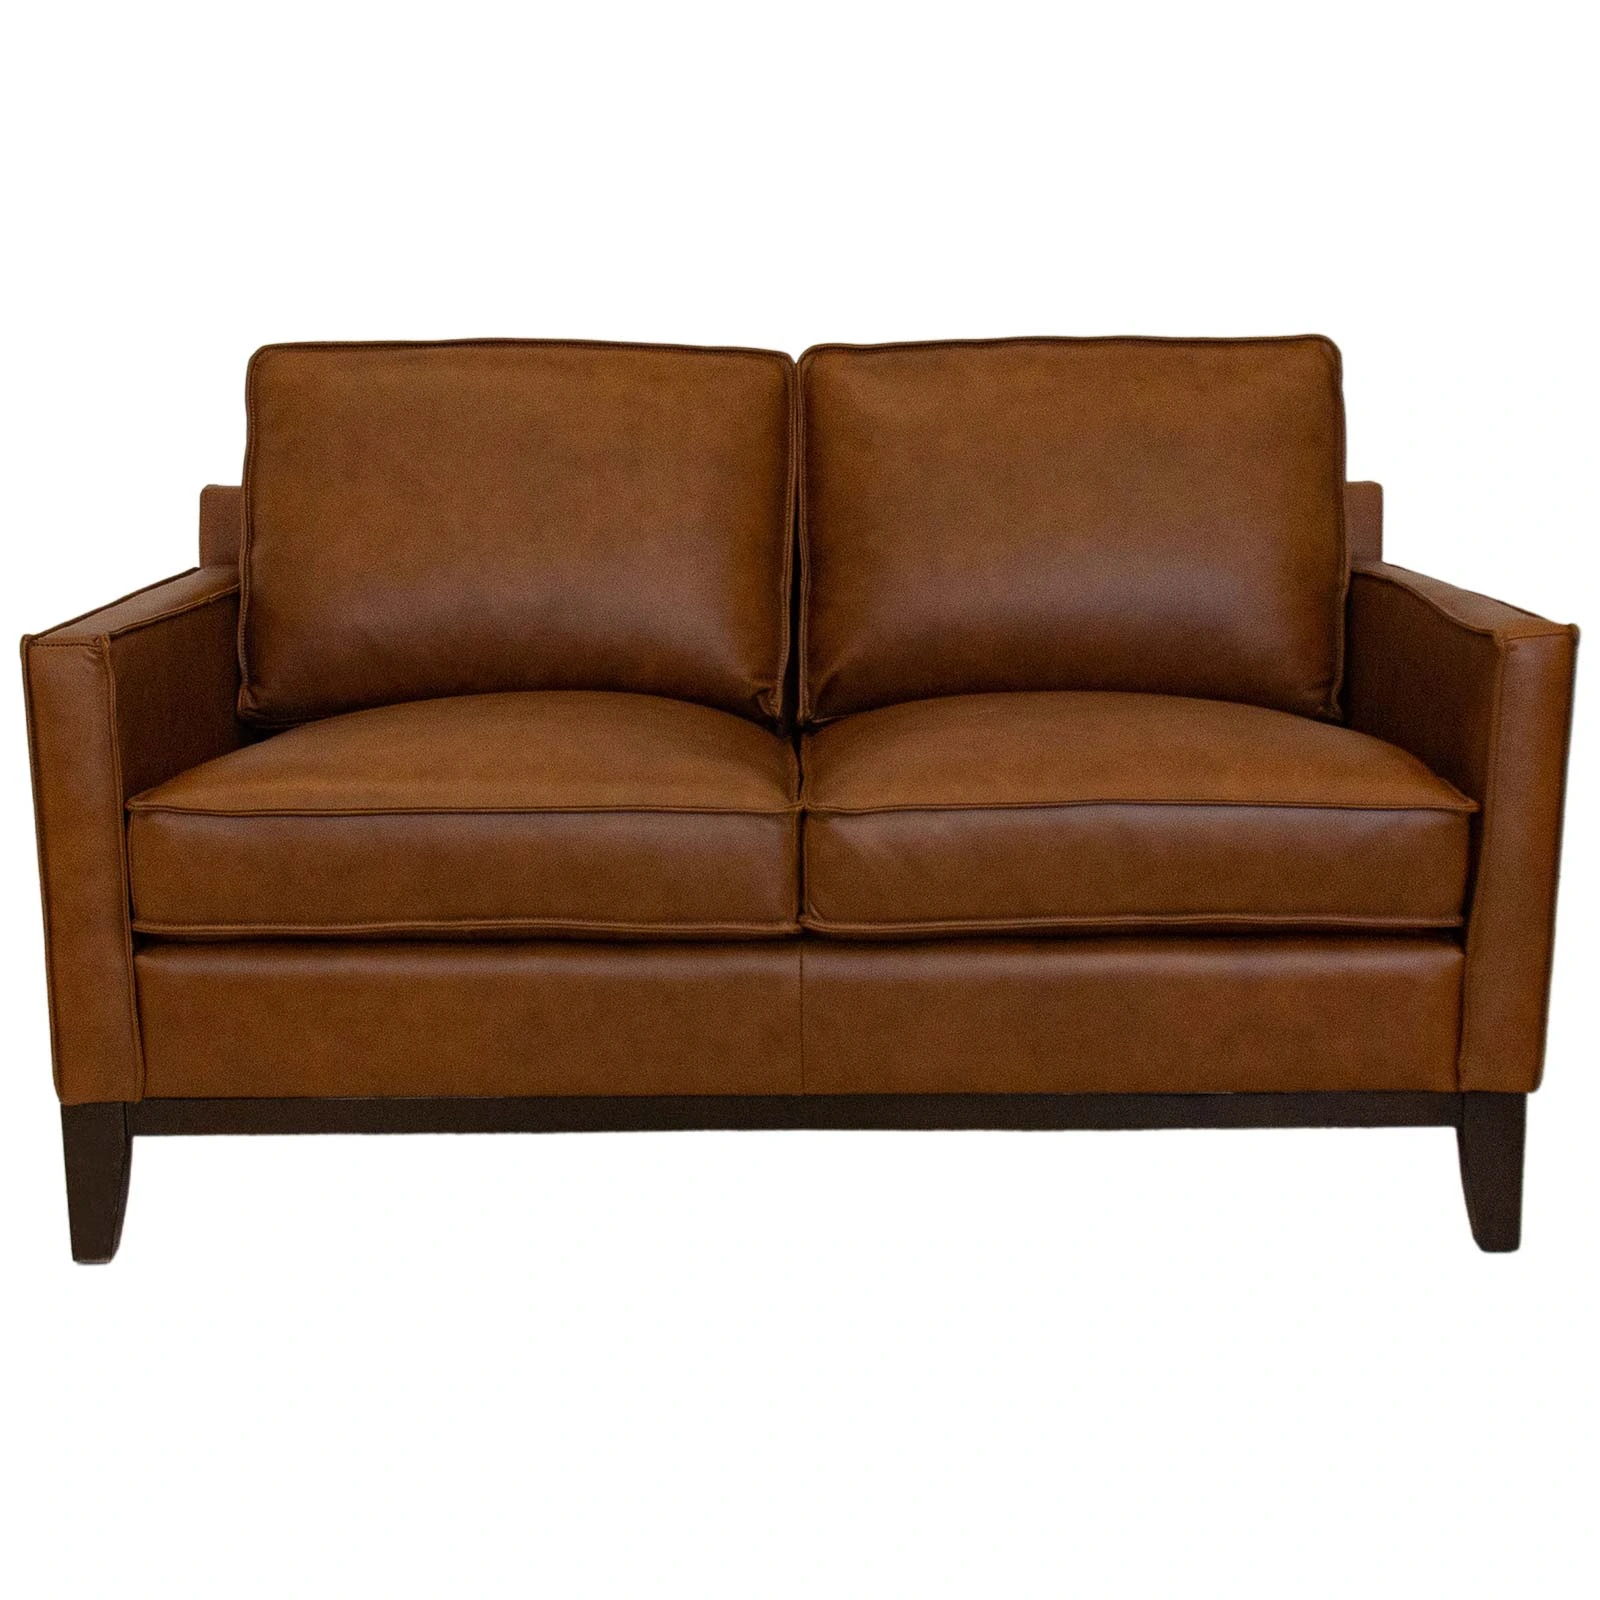 6 Unique Love Seat Sofas for Your Home | Great American Home Store | TN ...